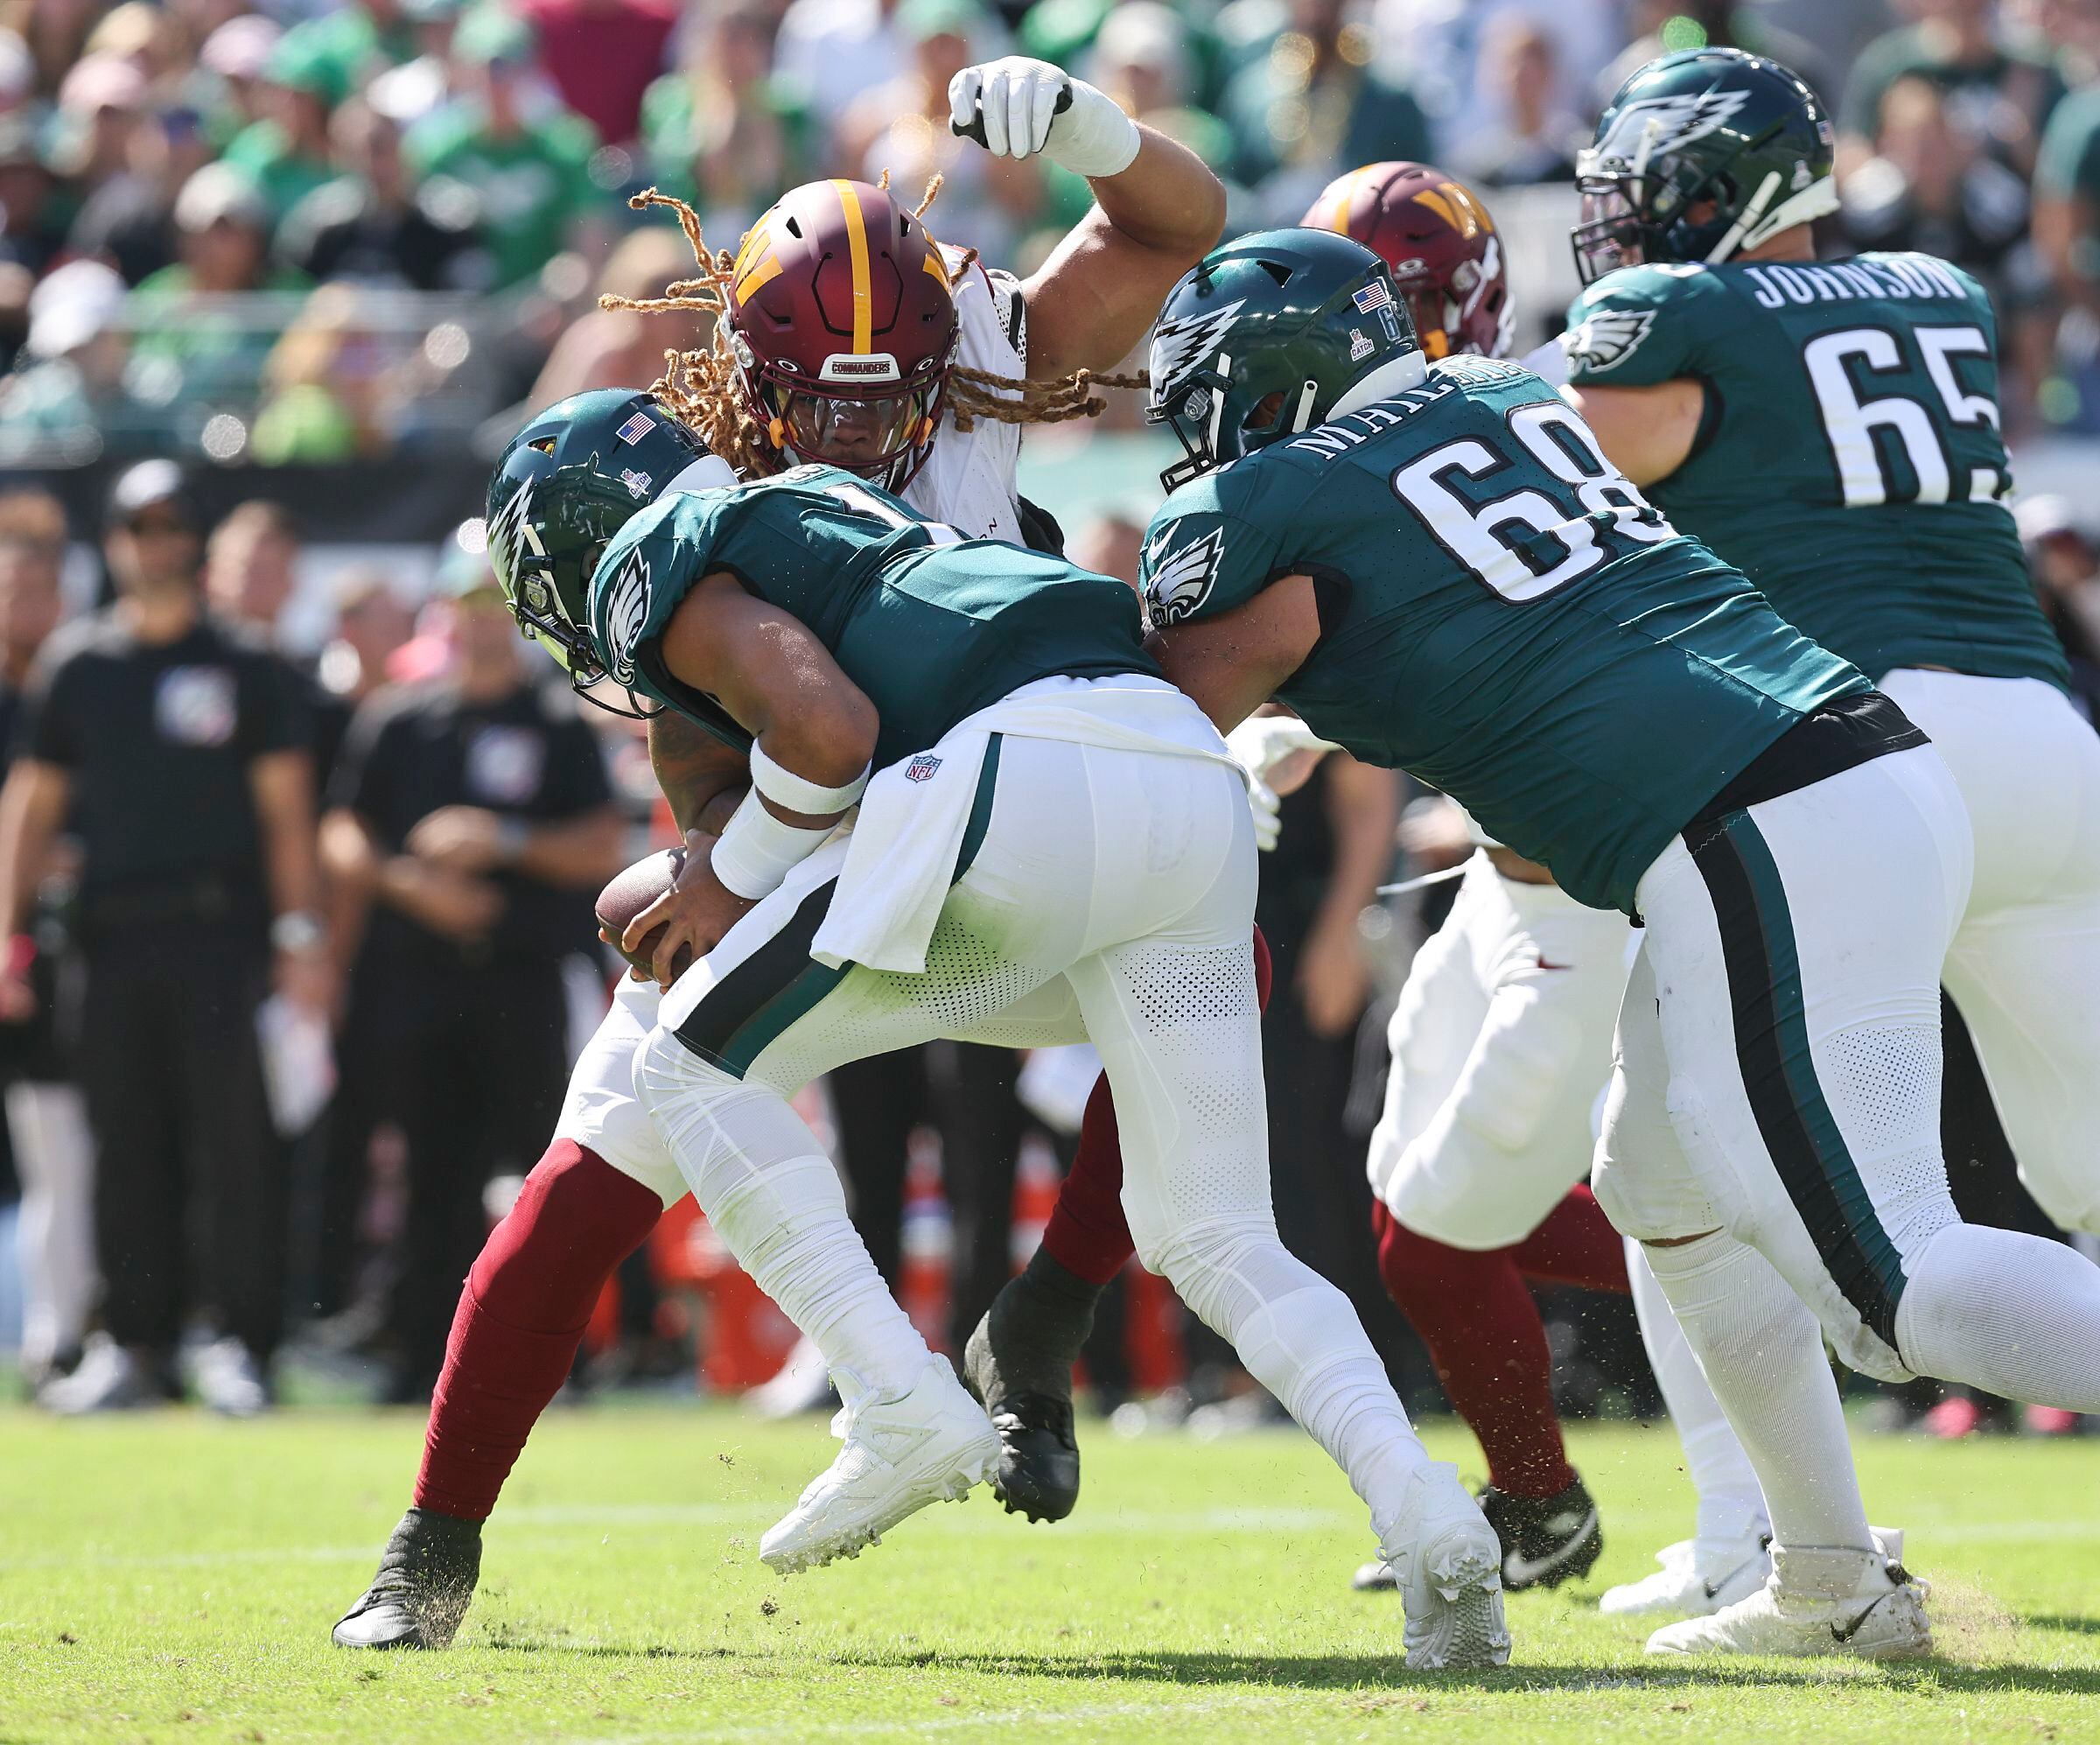 Eagles-Commanders what we learned: What to make of fourth-quarter defense?